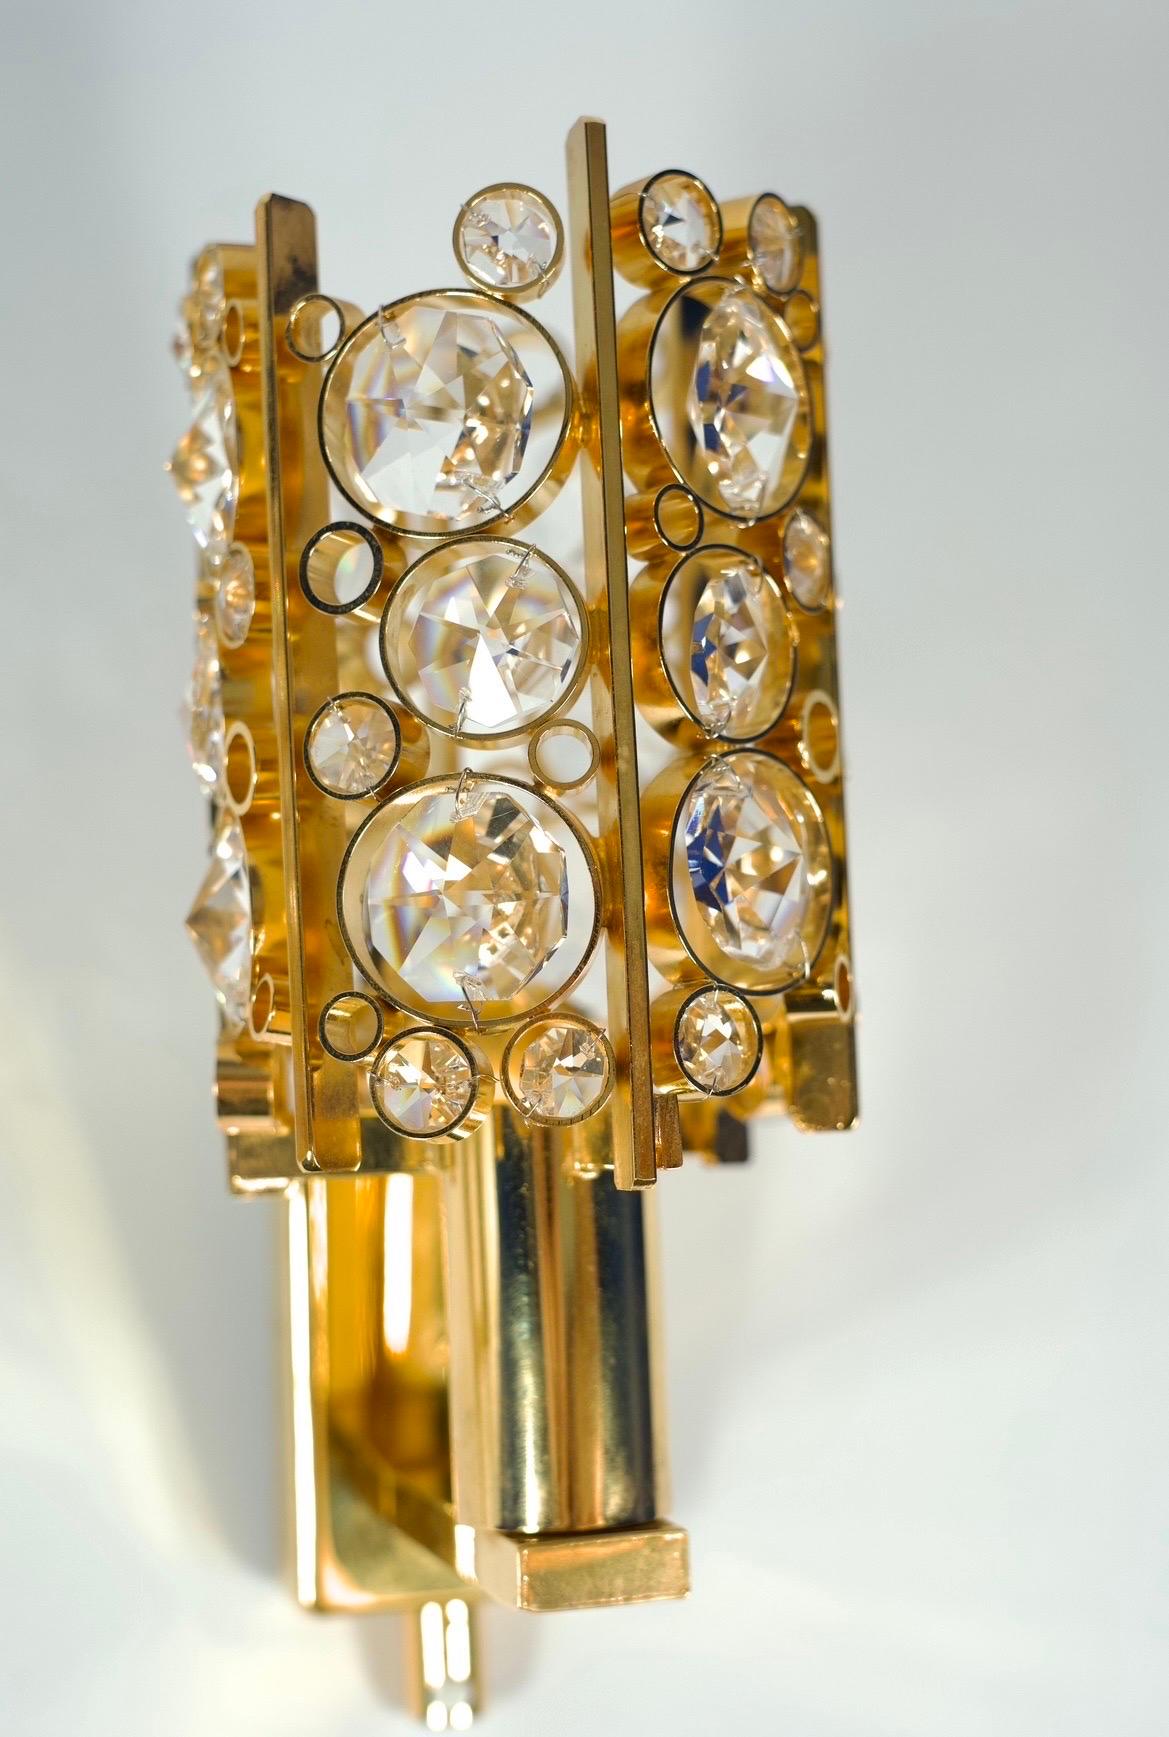 Pair of Palwa sconces cut crystals on a gold-plated frame, Vienna, 1960.
Elegant pair highly detailed gold-plated sconces with a single candelabra socket by Palwa Vienna, Austria, 1960.
Palwa used highest grade crystals for their lighting the